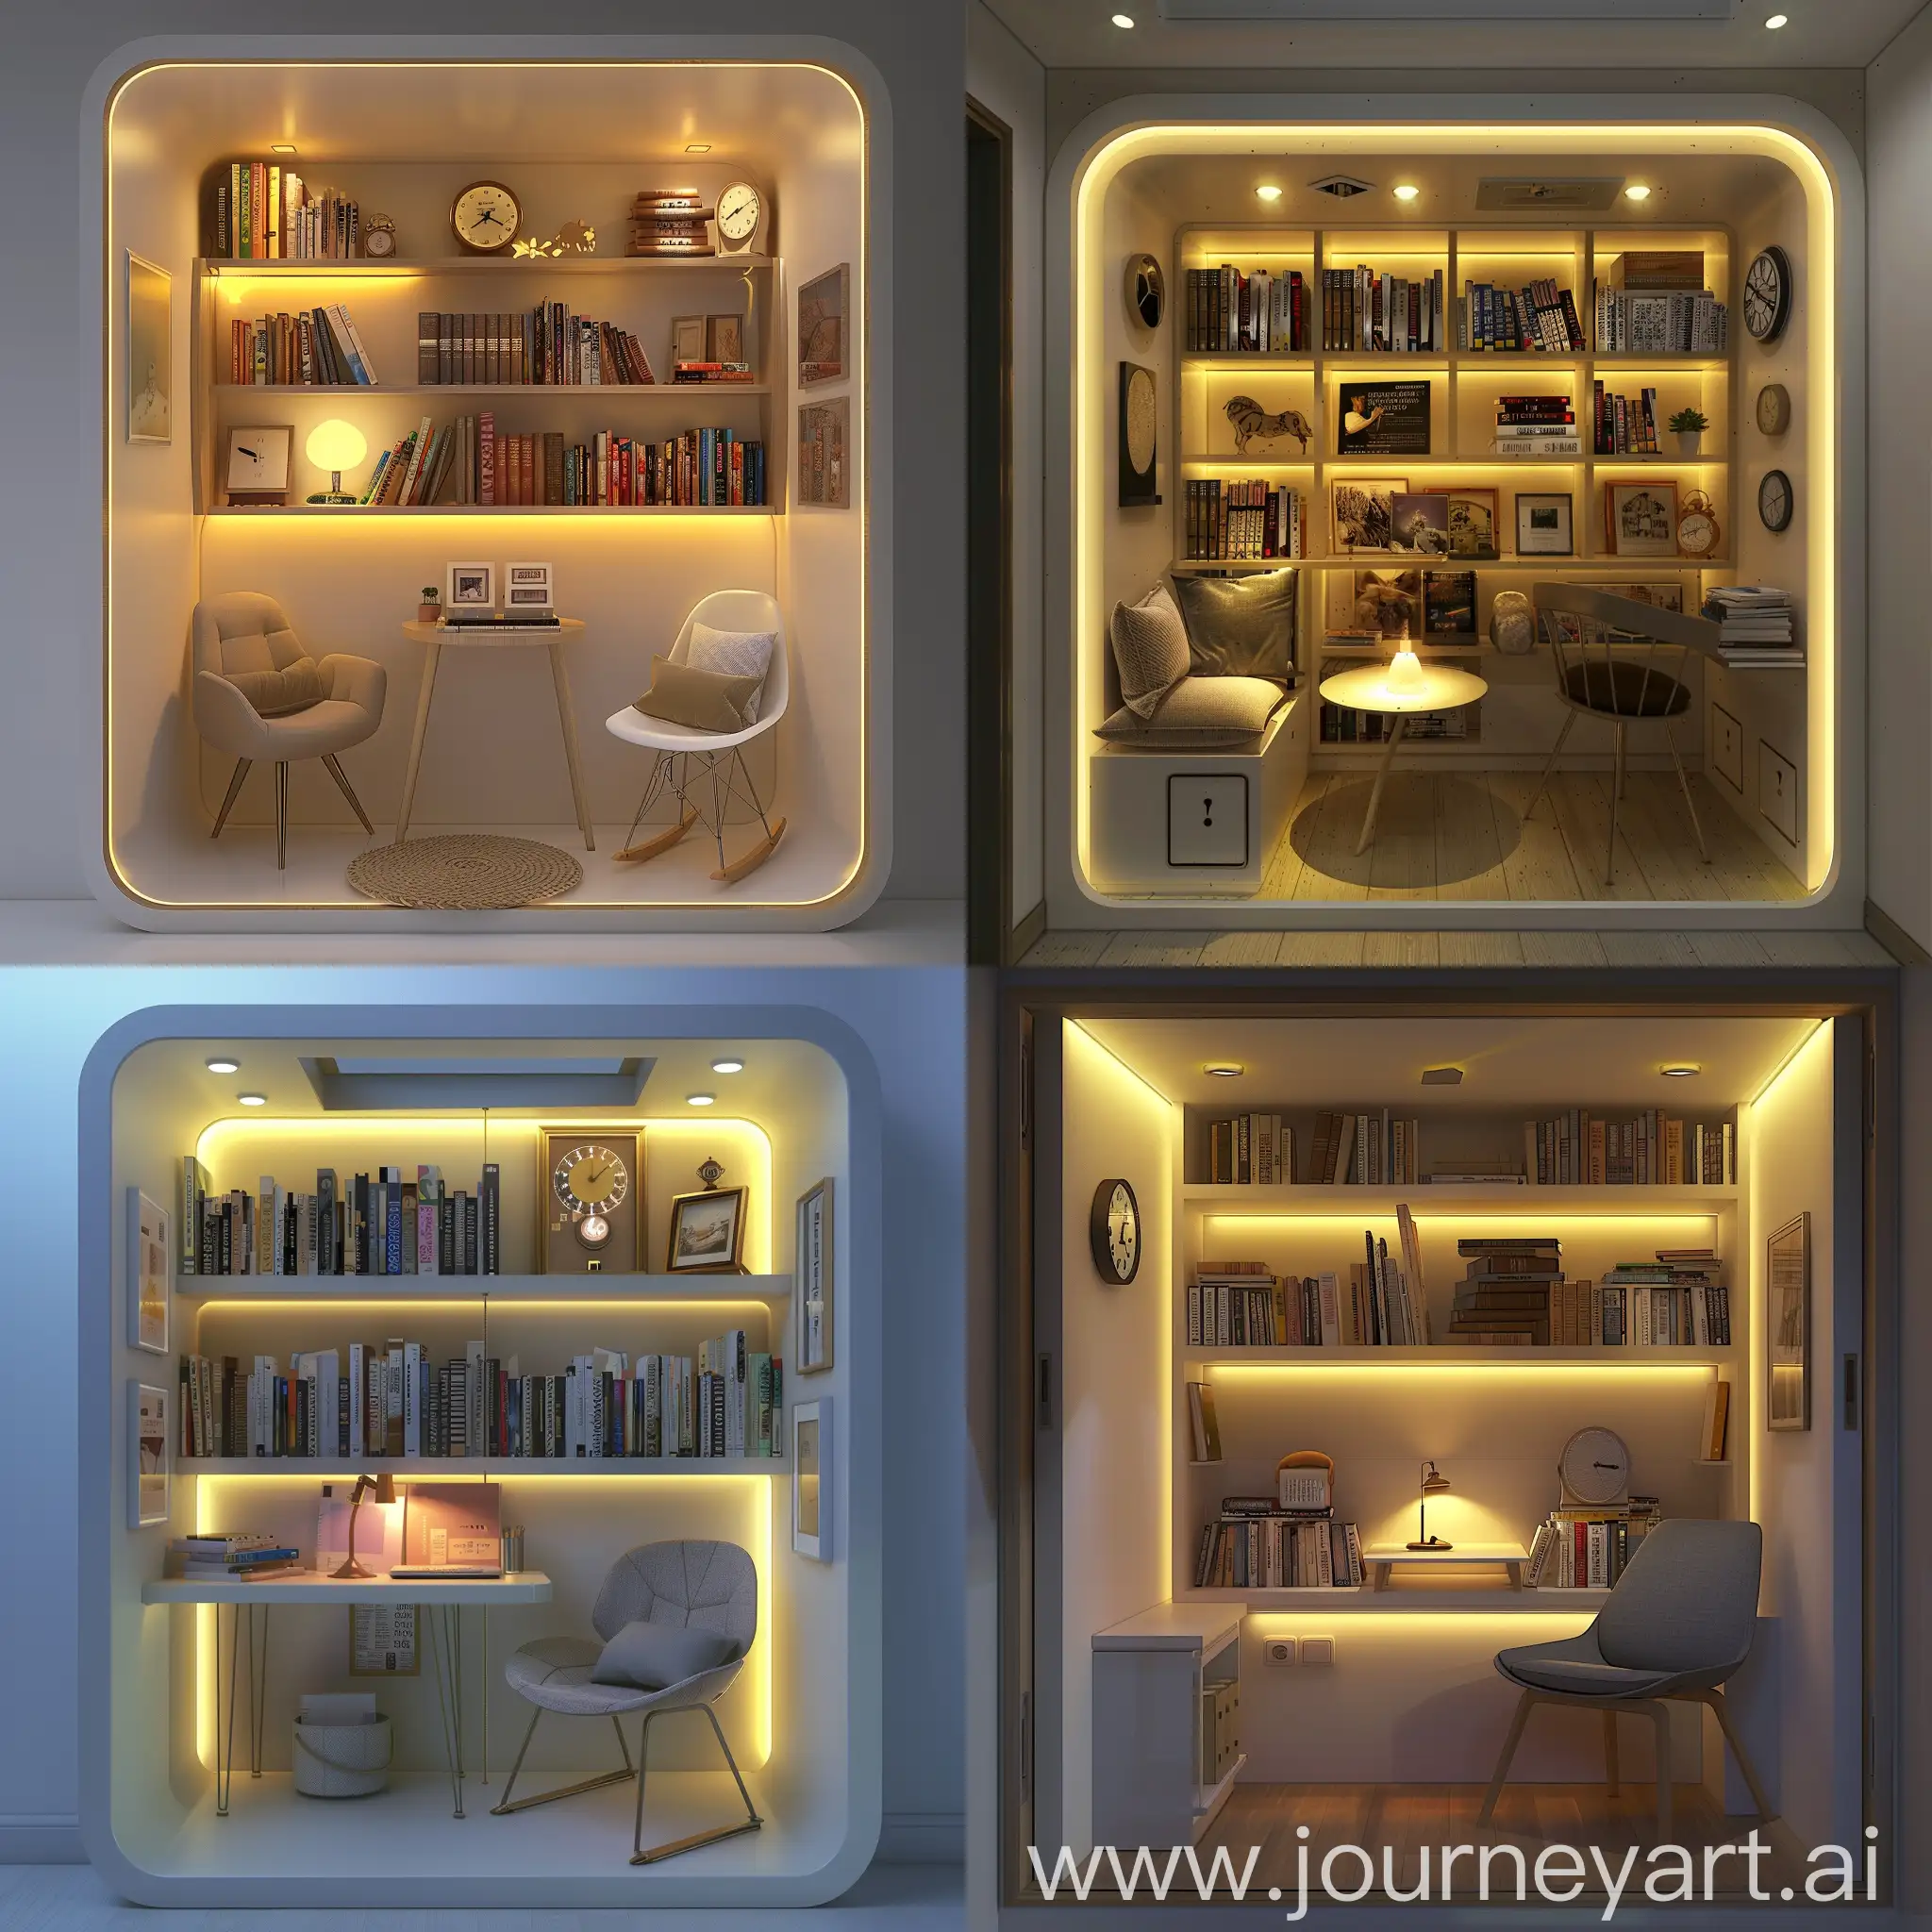 Cozy-Reading-Nook-with-Illuminated-Shelf-and-Table